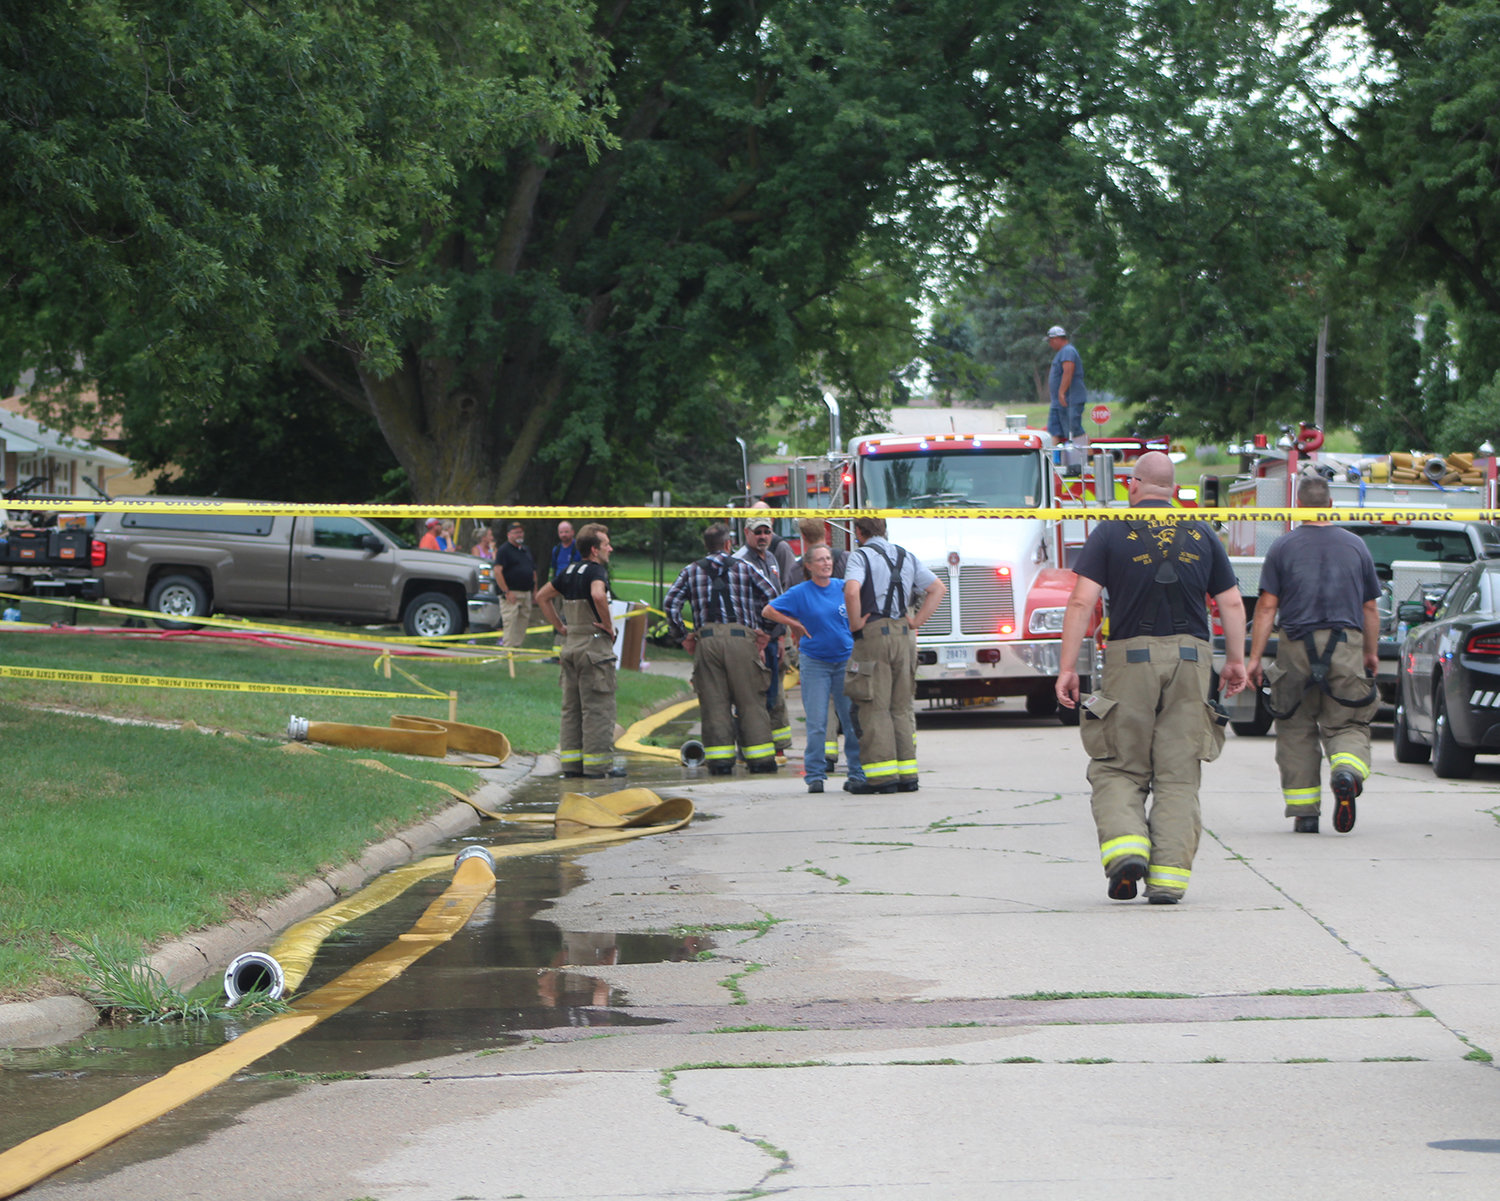 On Thursday, firefighters worked to put out a fire at 503 Elm Street. Investigators found three bodies inside the home.